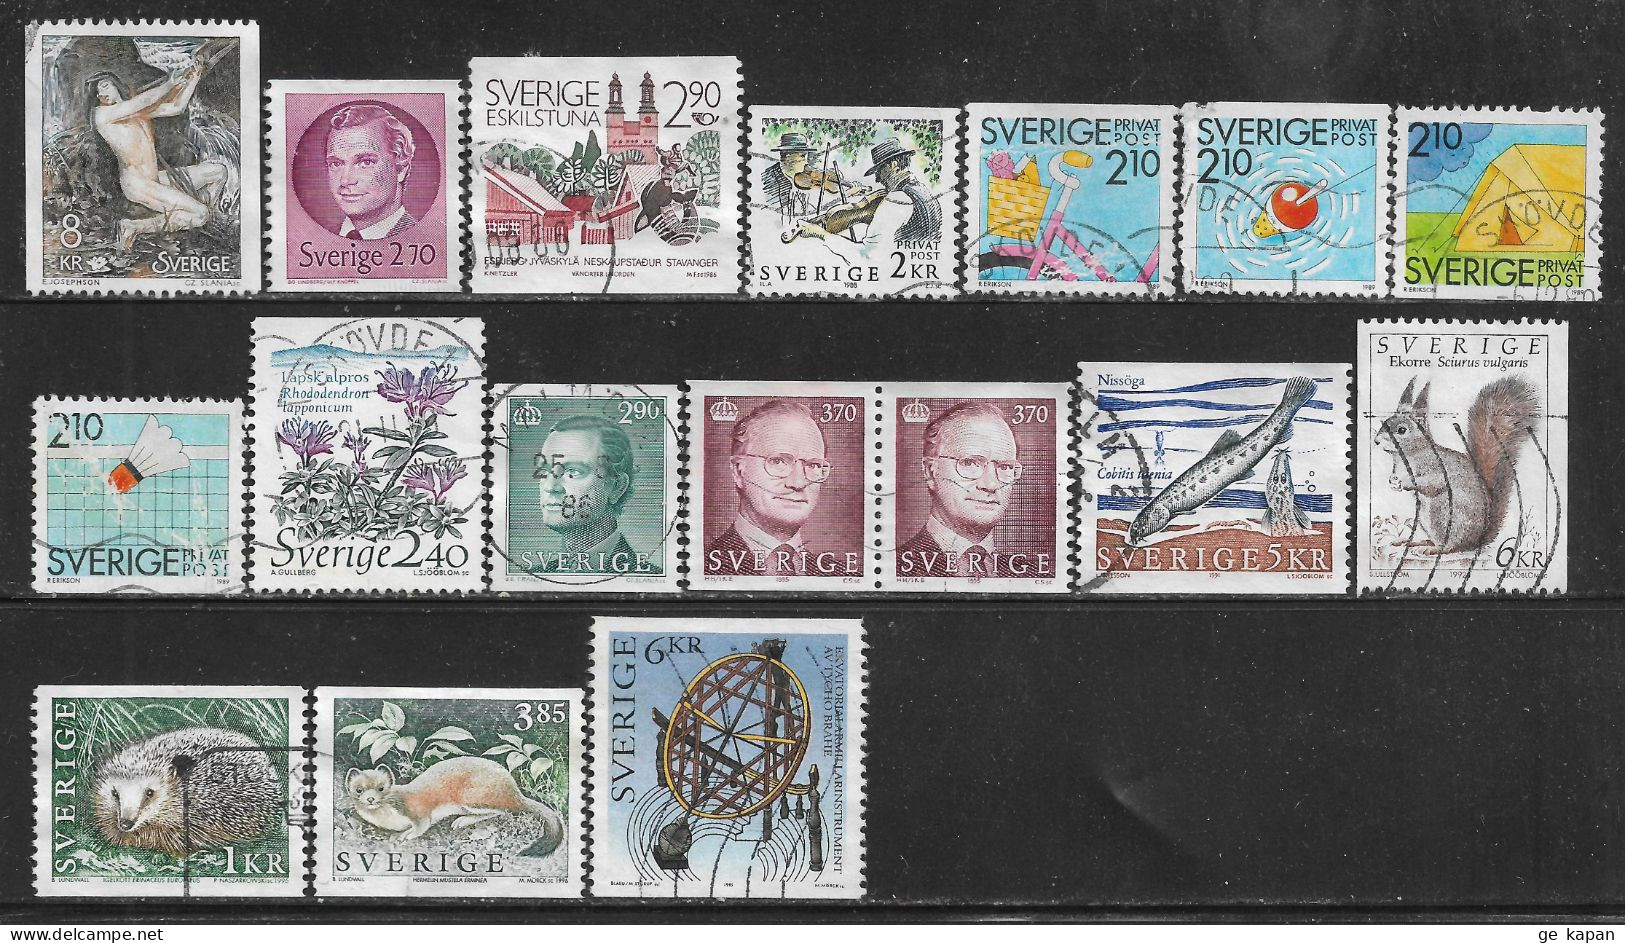 1980-96 SWEDEN 17 Used Stamps (Sc.# 1340,1372,1604,1685,1741,1743,1744,1746,1762,1785,1787,1869,1933,1926,1931) CV $7.95 - Used Stamps